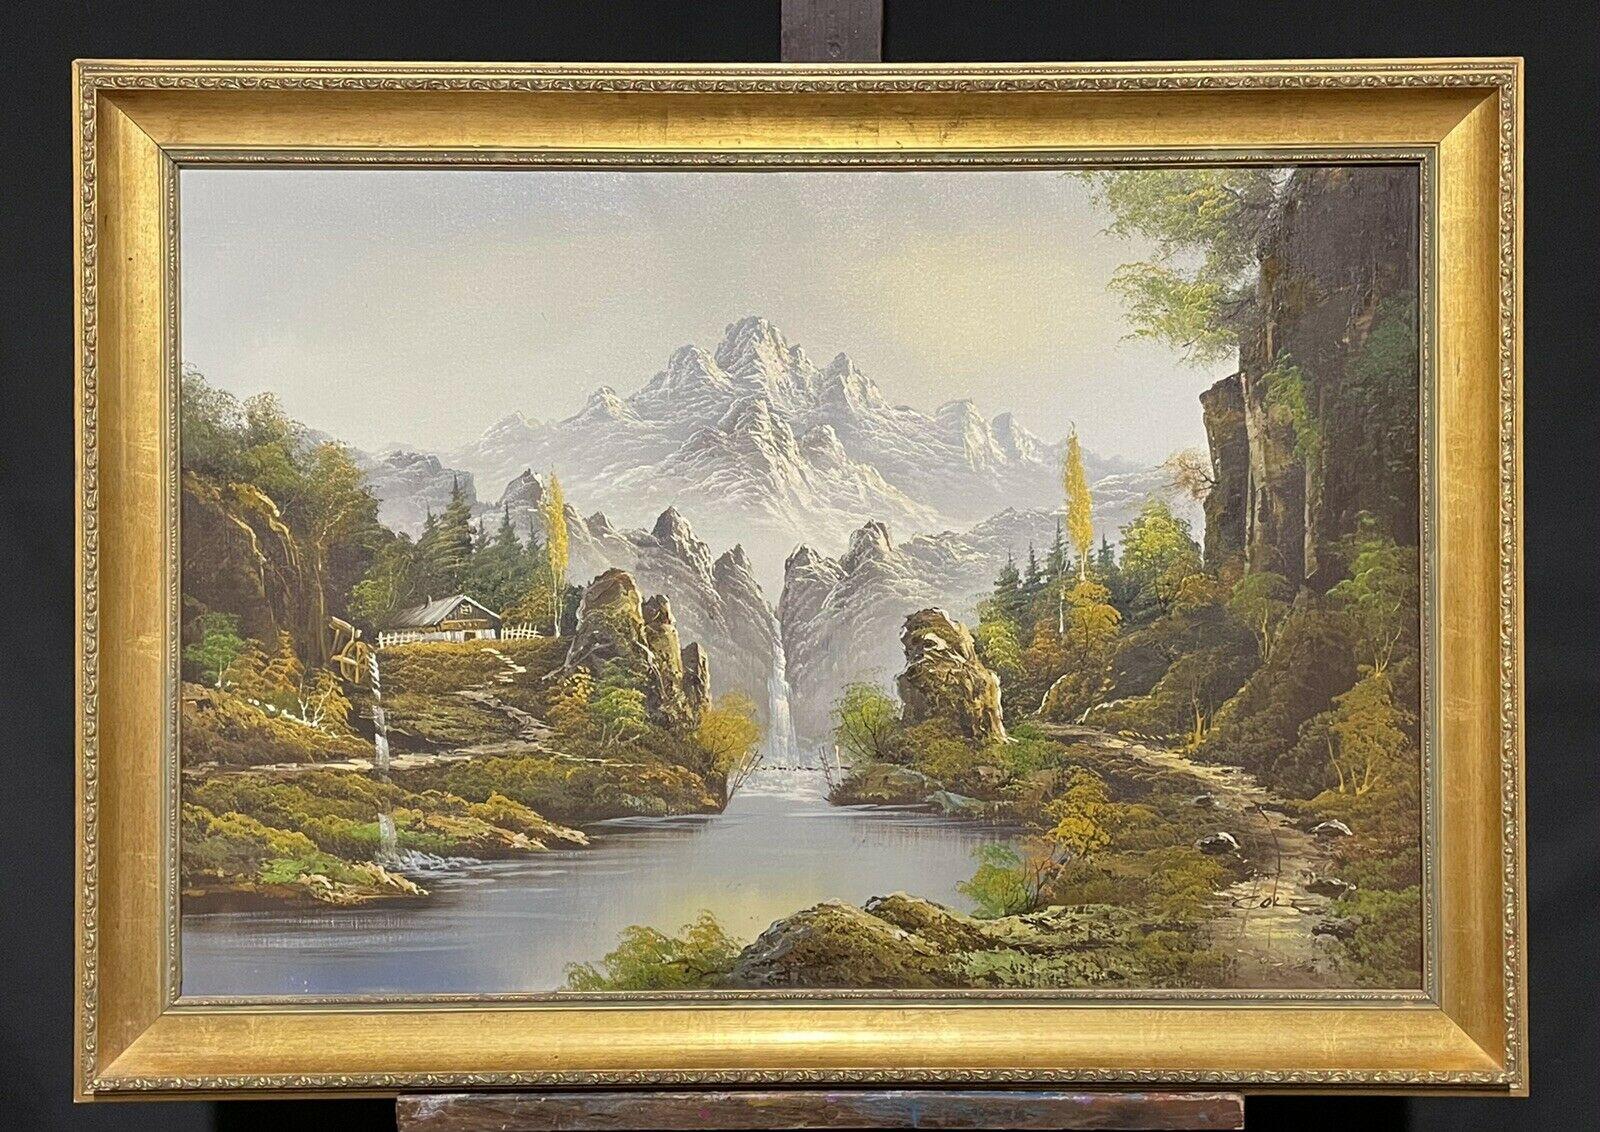 HUGE SIGNED EUROPEAN OIL PAINTING - RUGGED MOUNTAIN LANDSCAPE WATERFALL RIVER - Painting by Unknown